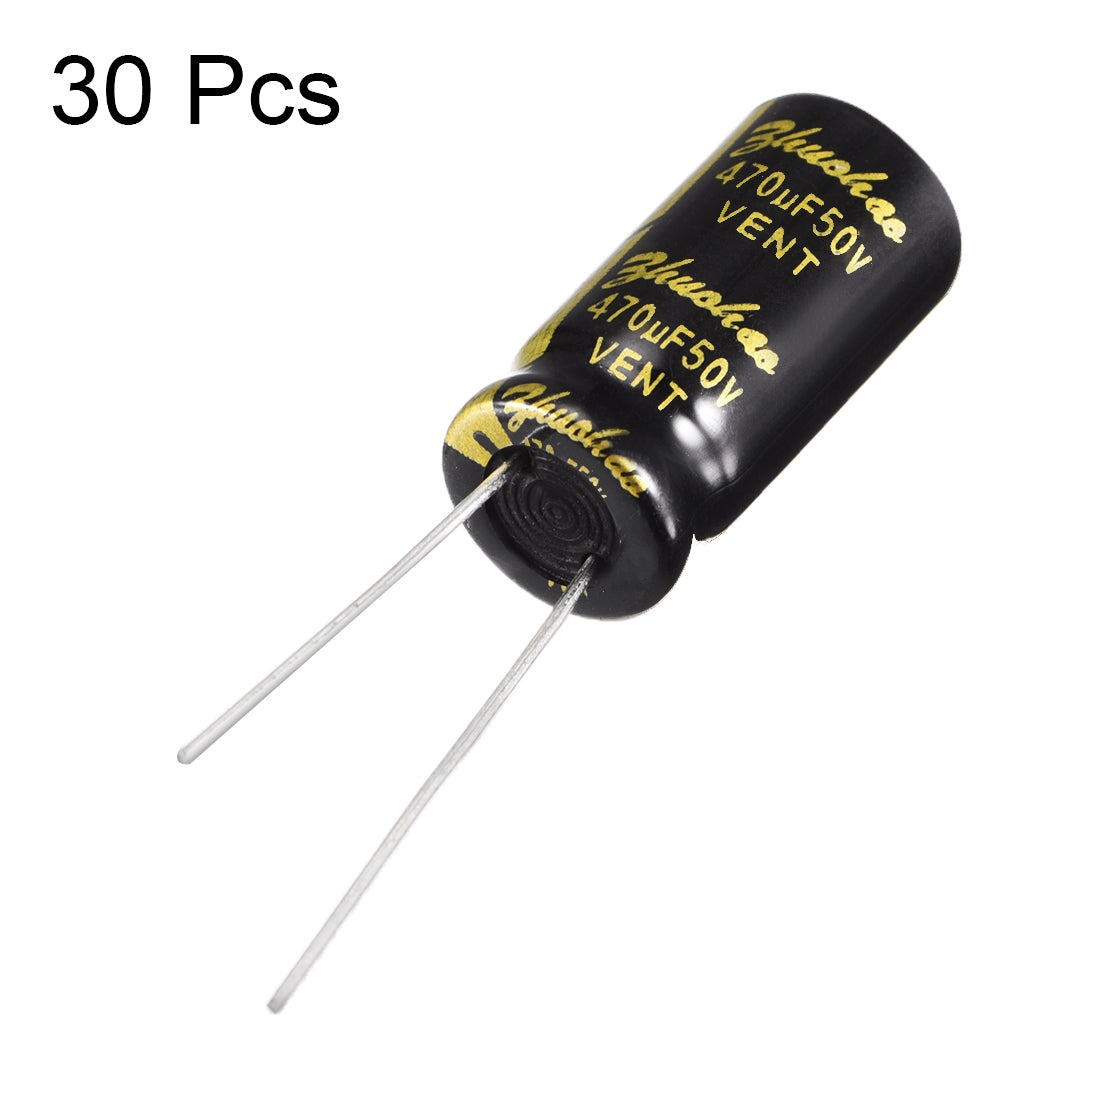 uxcell Uxcell Aluminum Radial Electrolytic Capacitor with 470uF 50V 105 Celsius Life 2000H 10 x 20 mm Black 30pcs